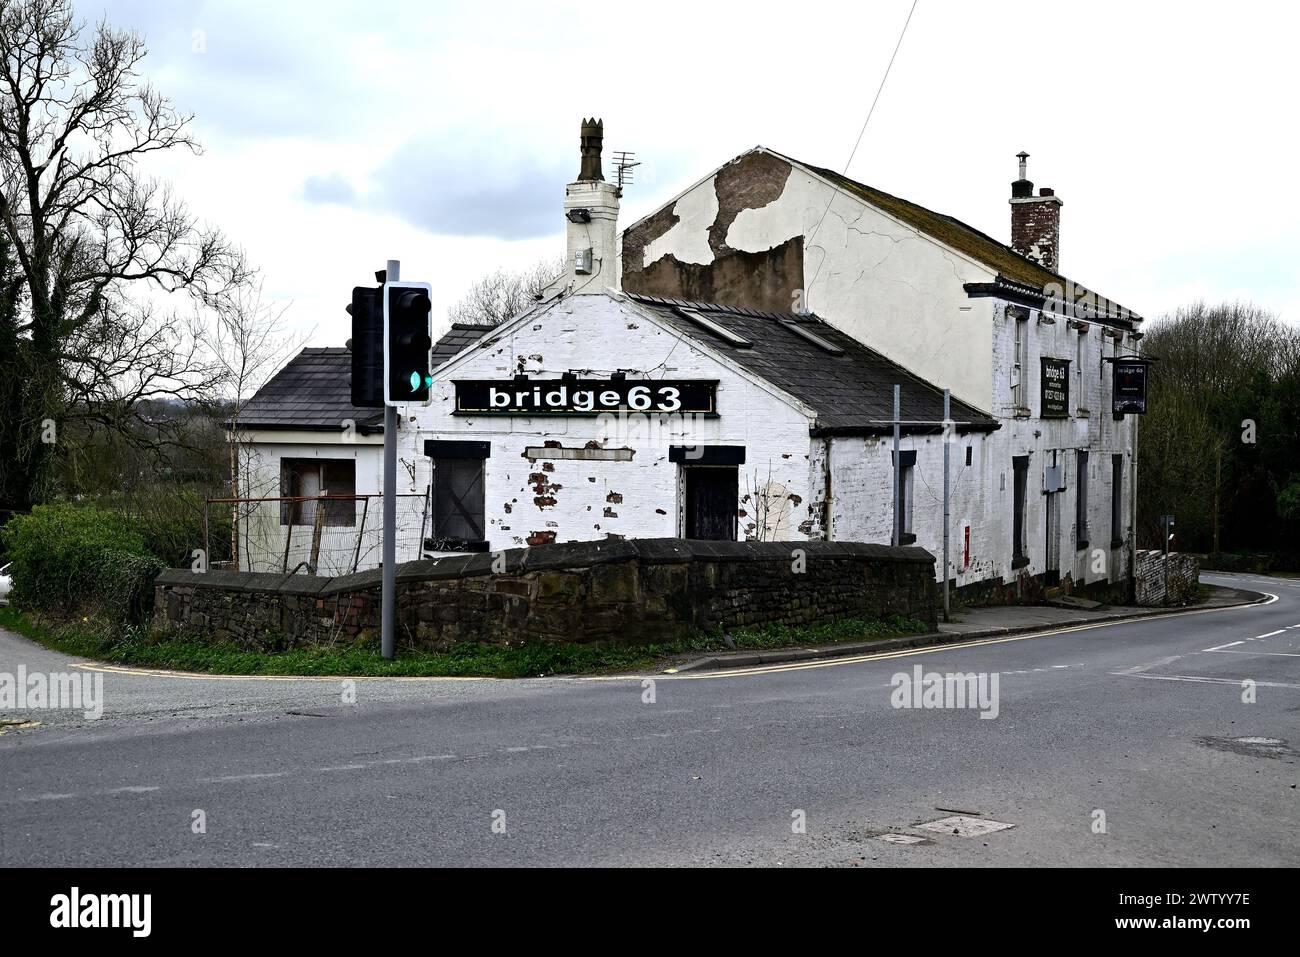 Around The UK - Canalside public house that has been closed for some time. Stock Photo